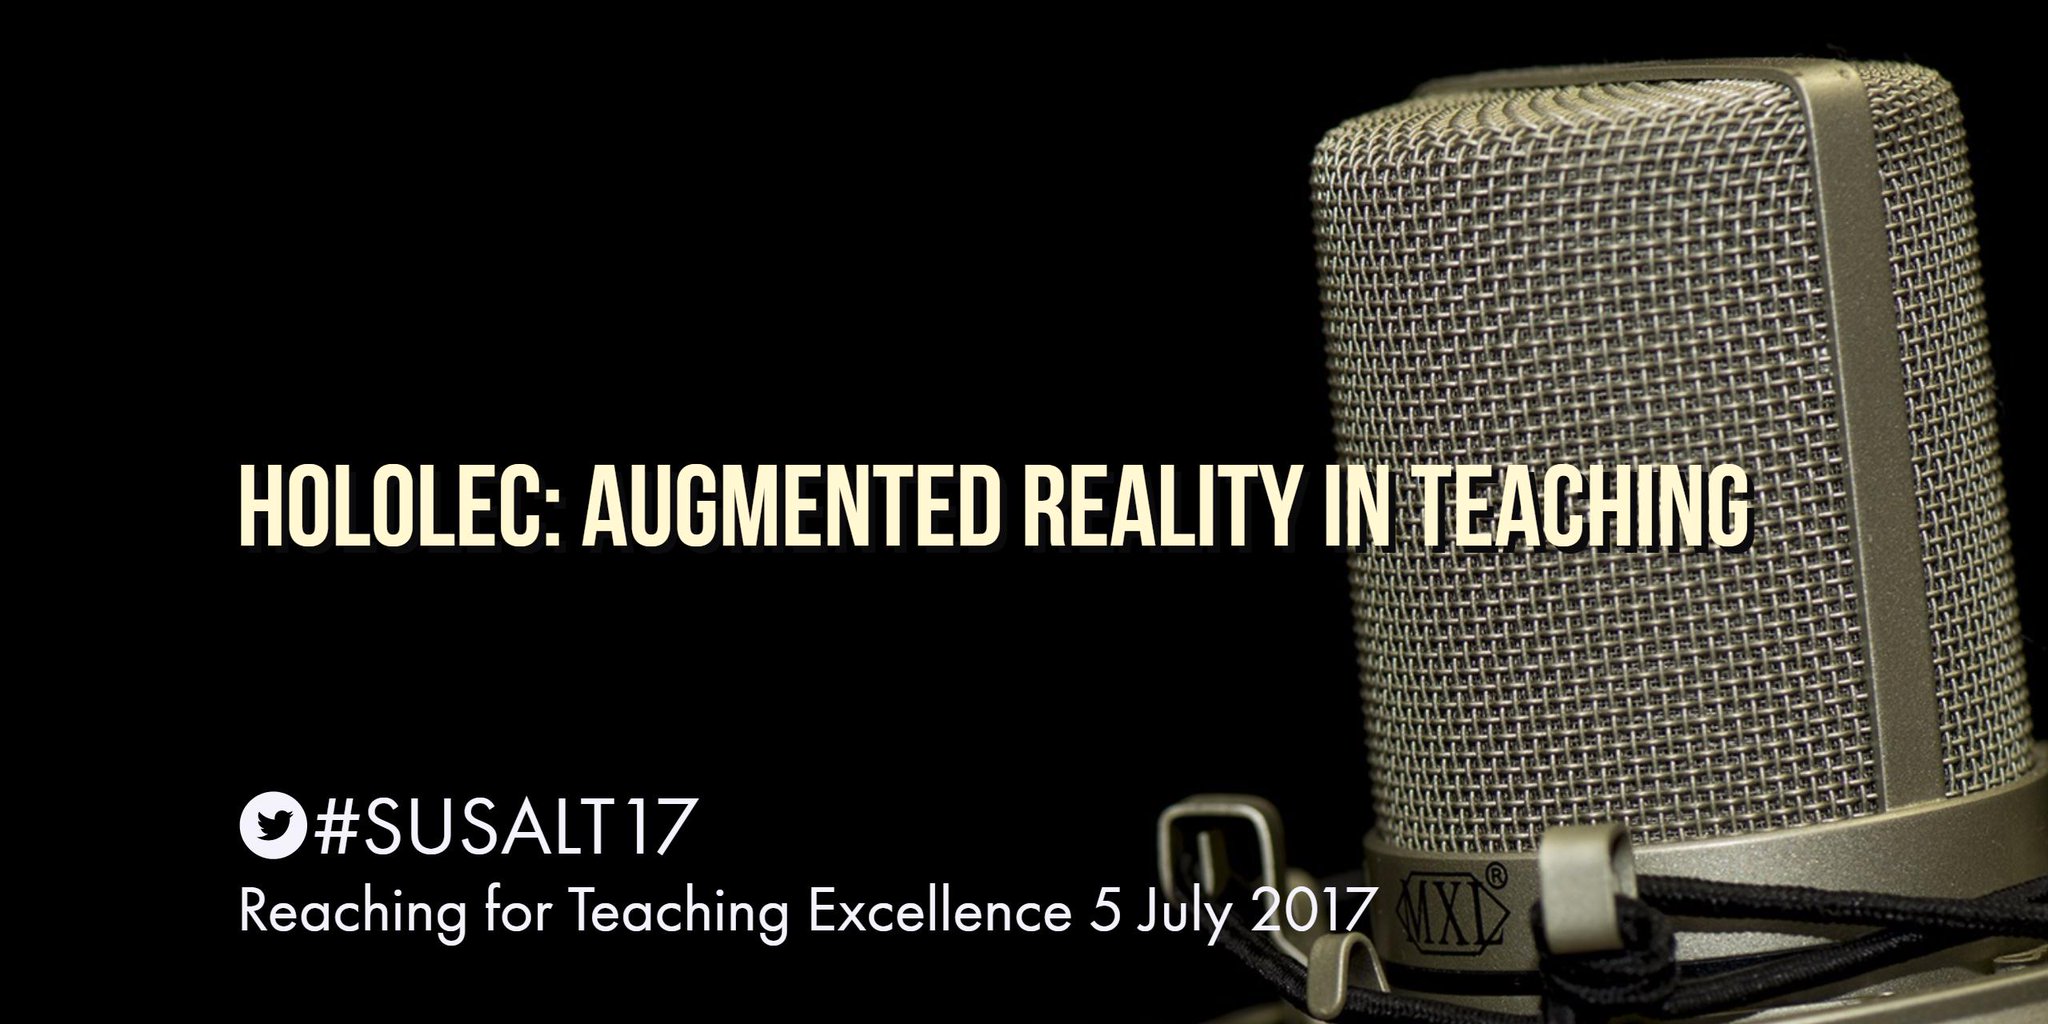 Whoo hoo !Looking forward to the Augmented Reality Session tomorrow with @is_this_really  #susalt17 https://t.co/b0uEXSlfco https://t.co/TW9f47hAfQ